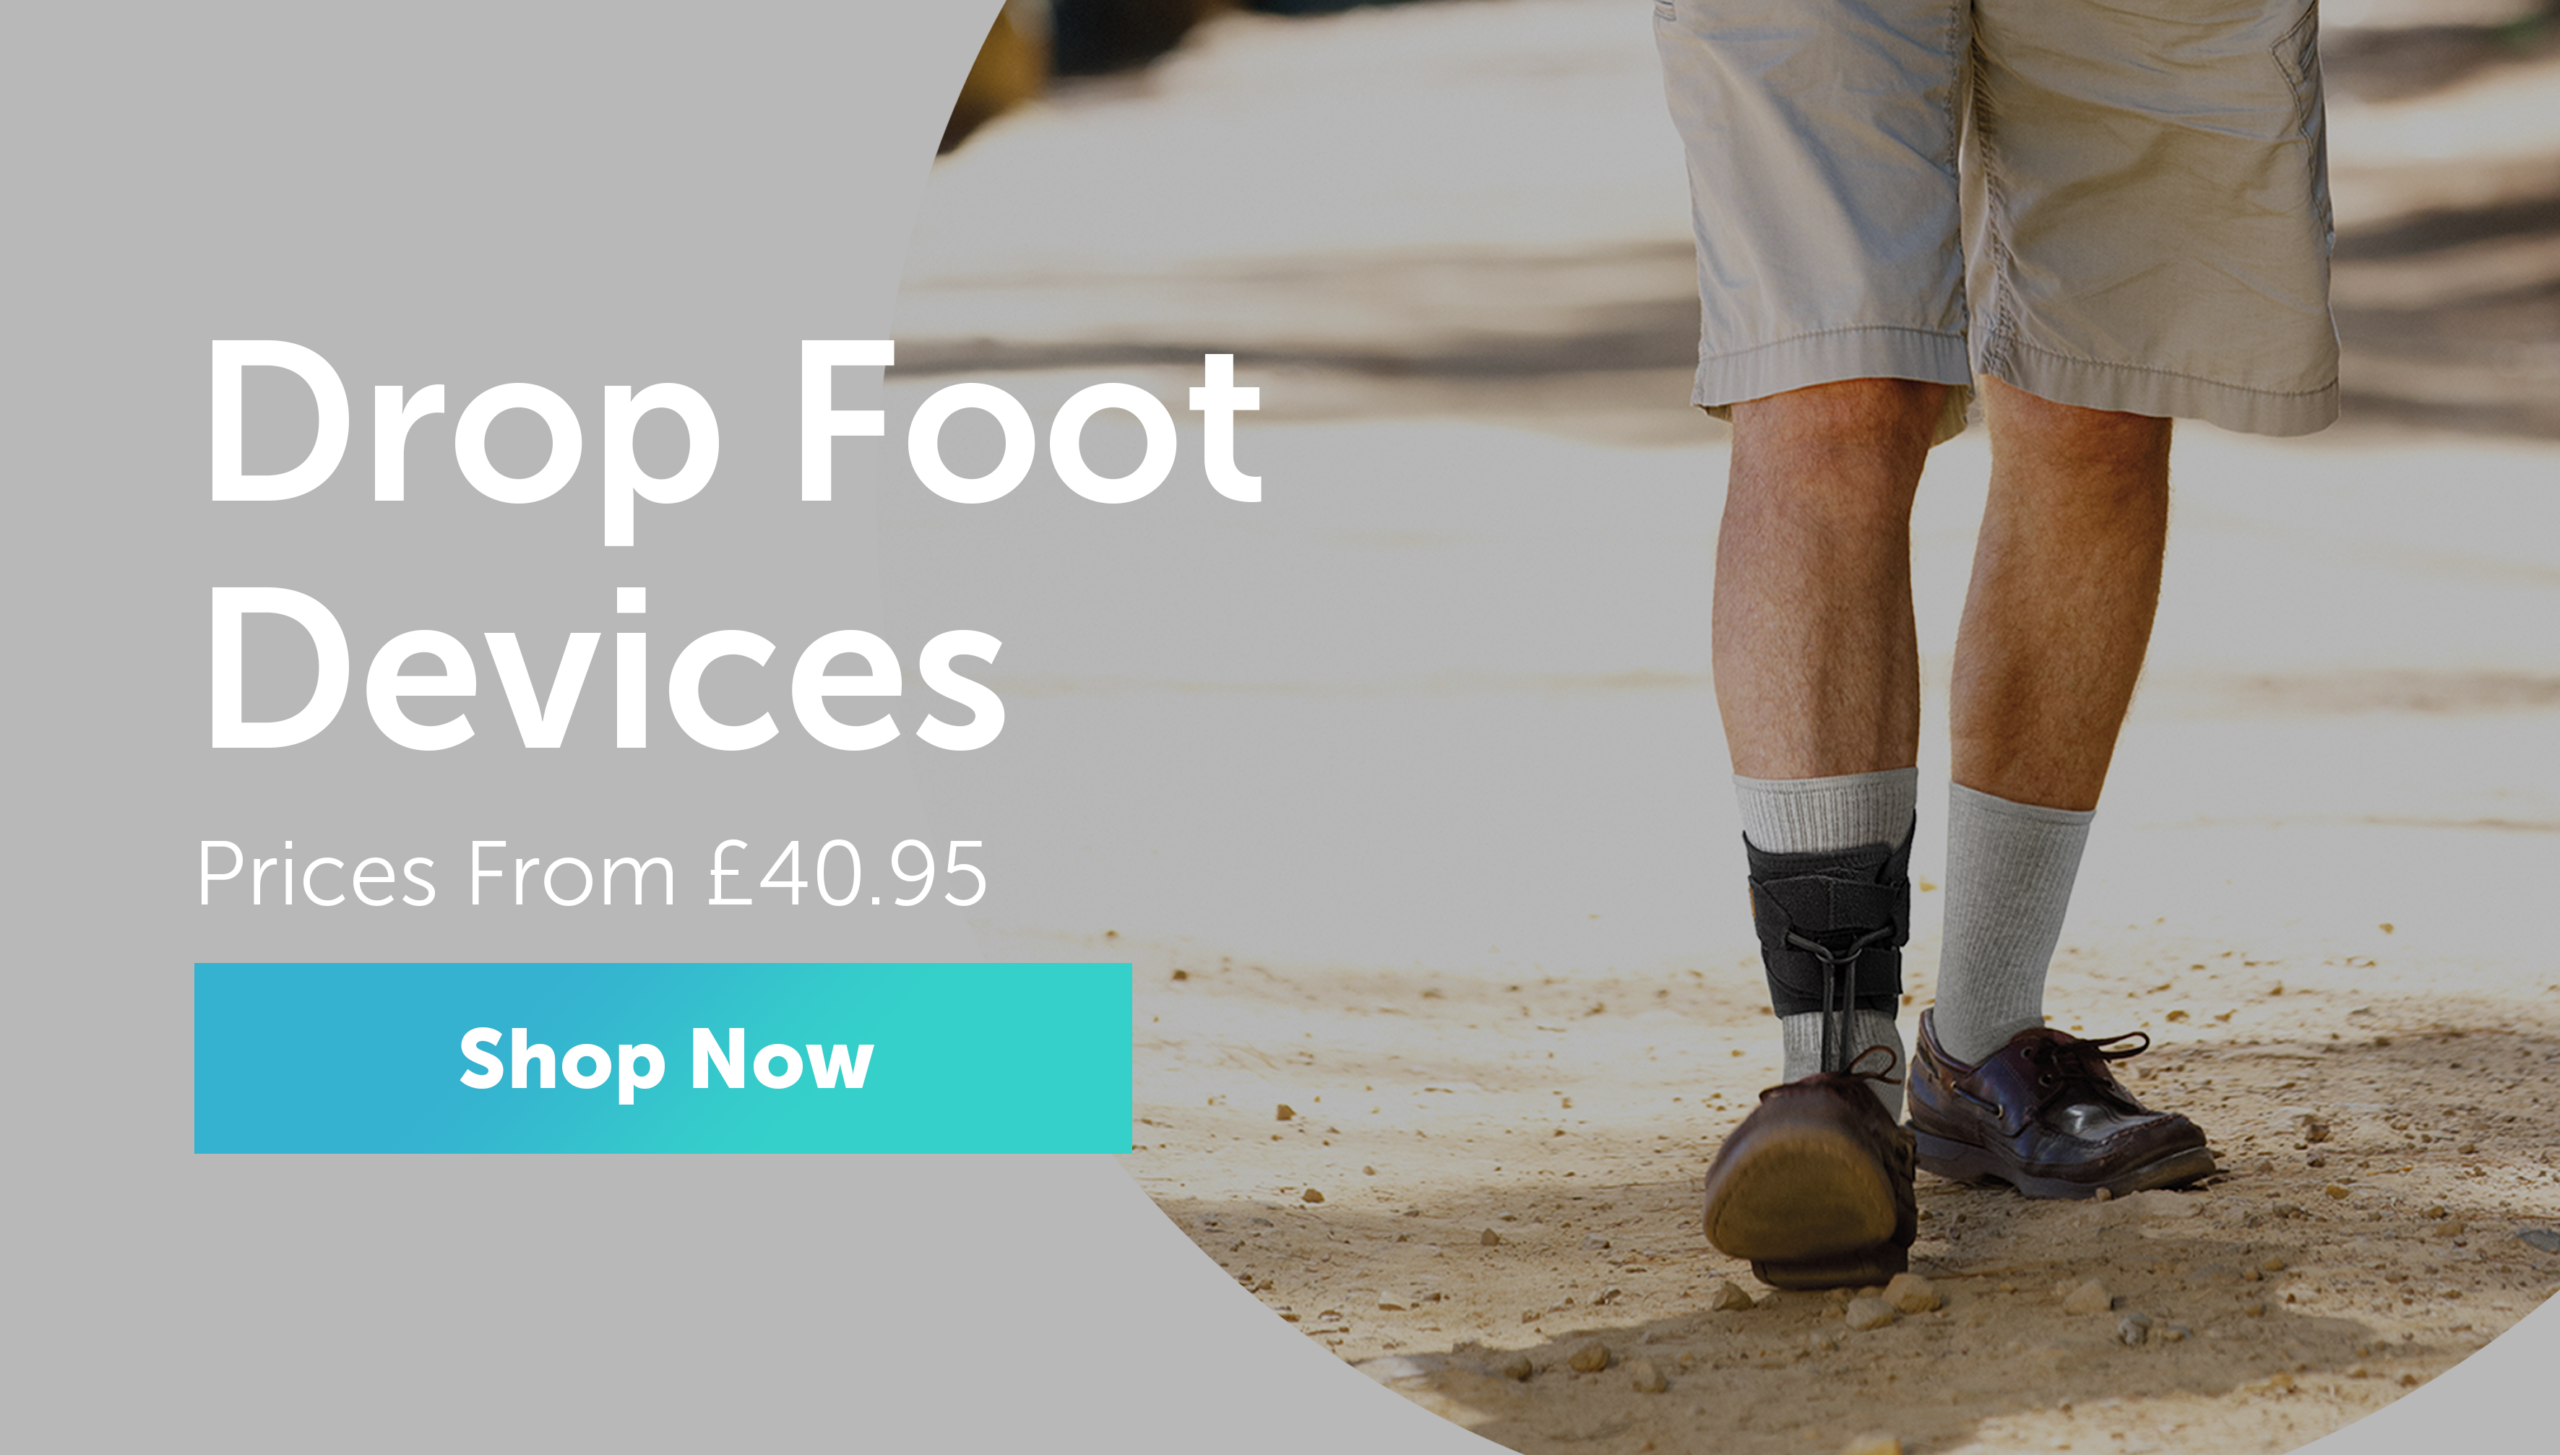 Drop Foot Devices from £40.95